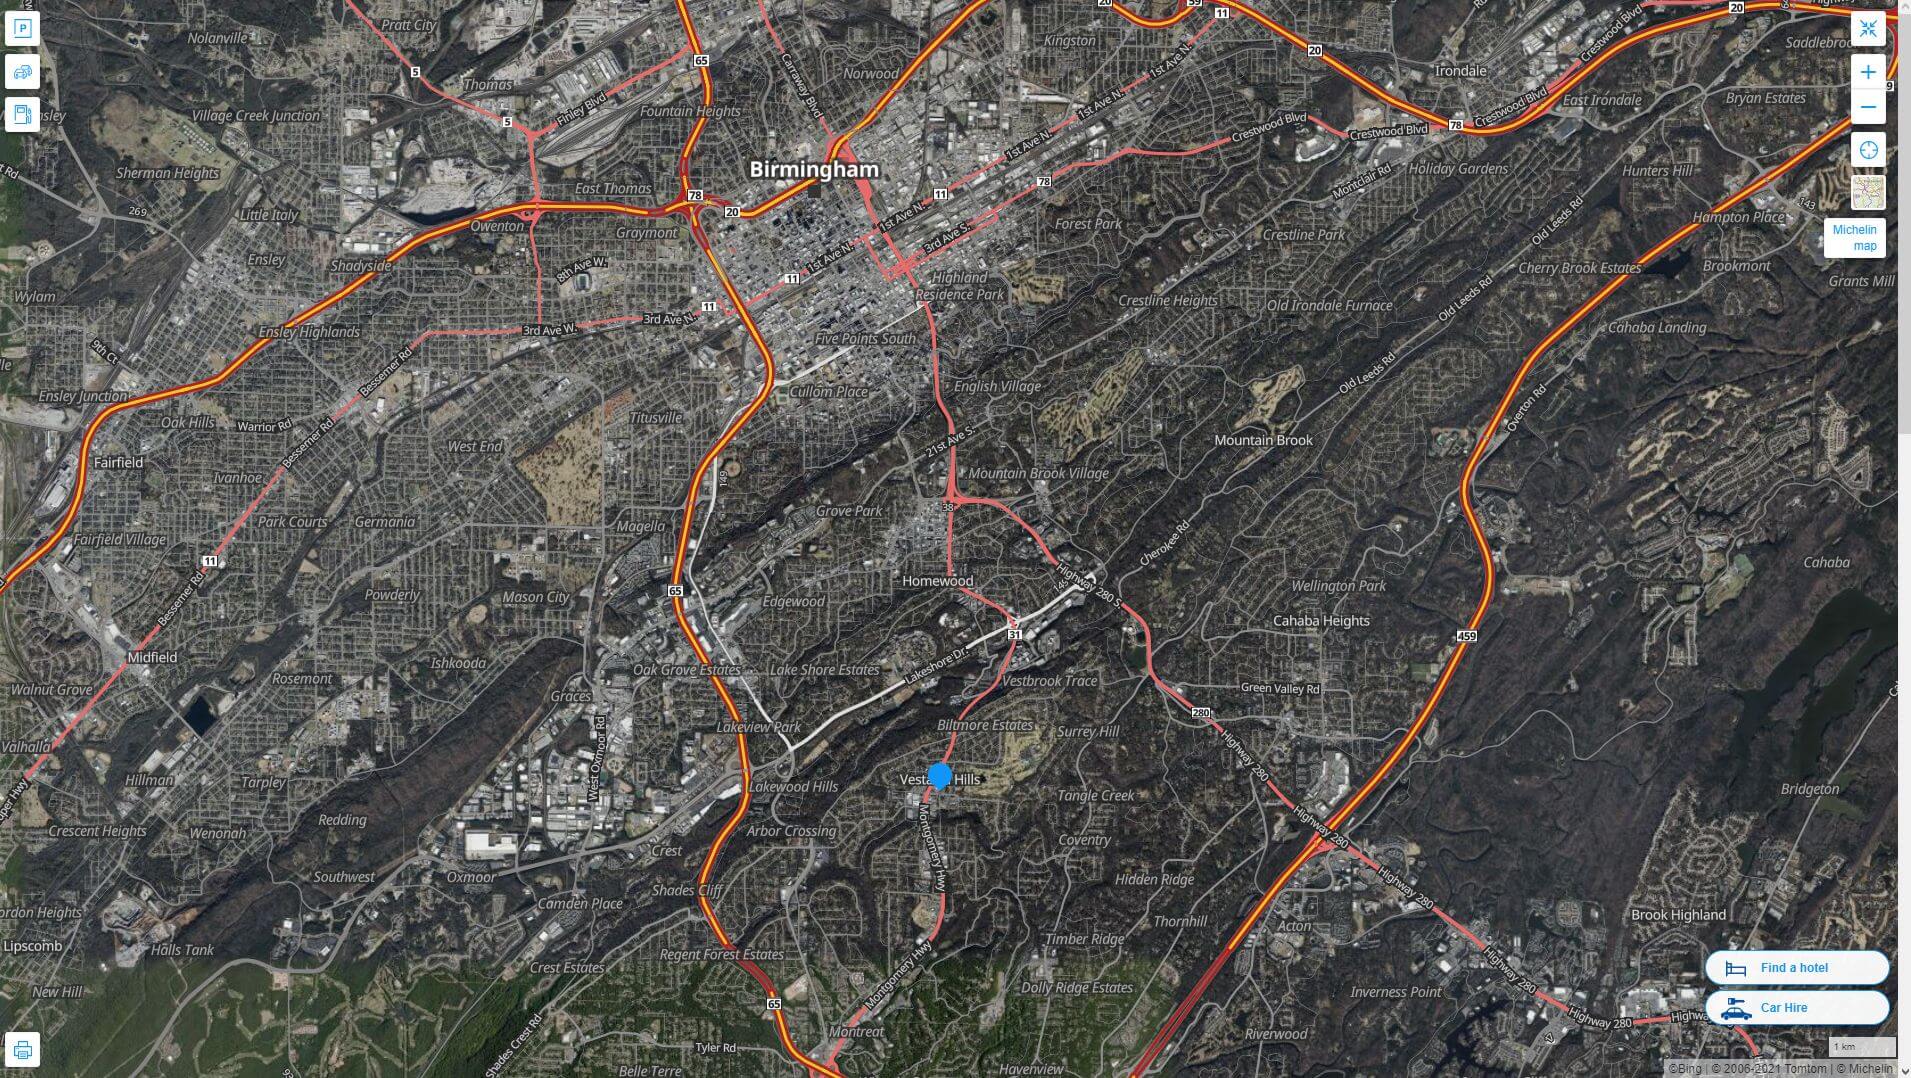 Vestavia Hills Alabama Highway and Road Map with Satellite View